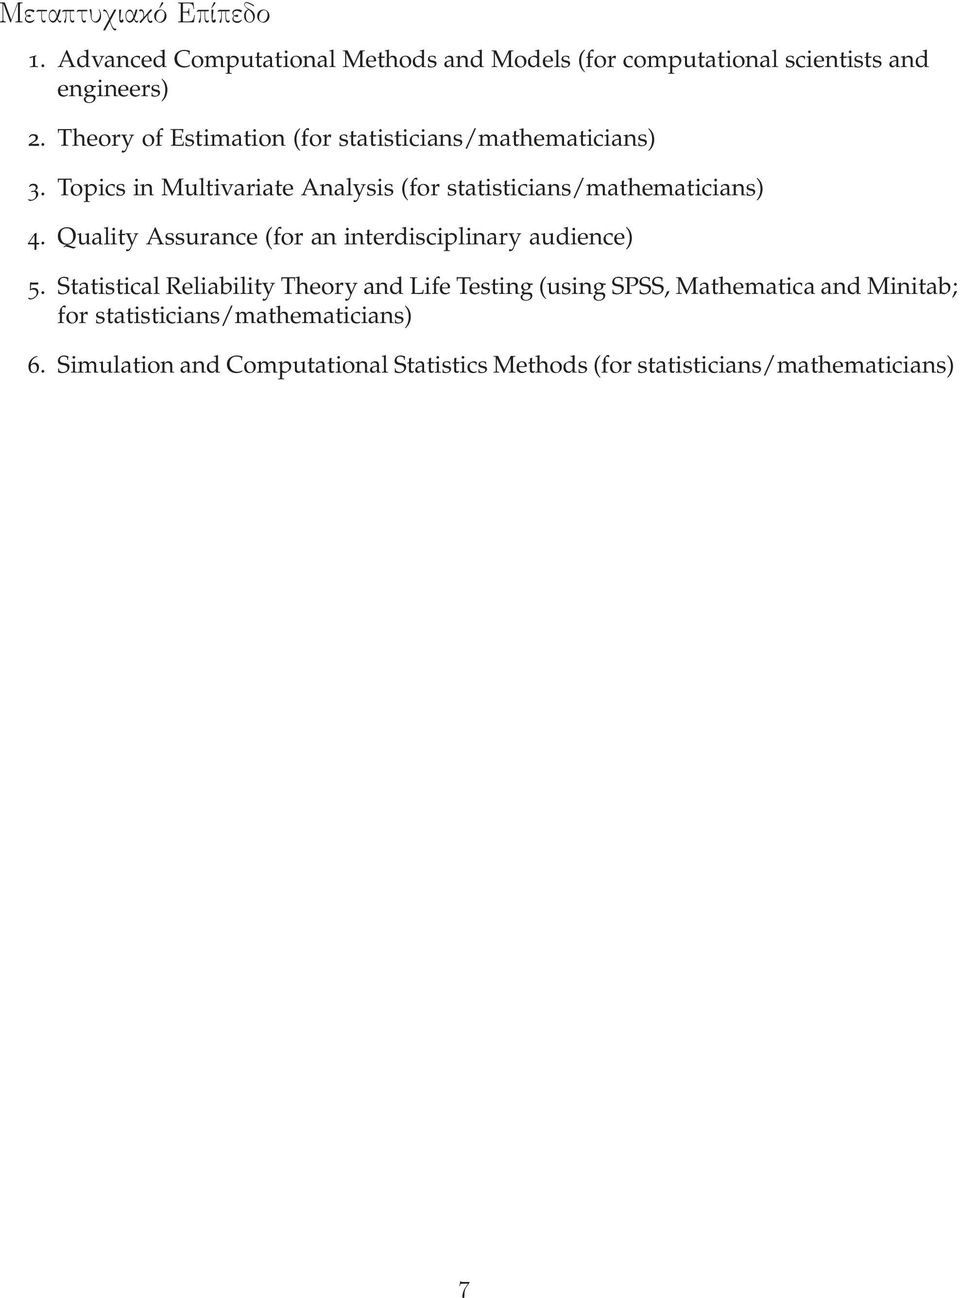 Topics in Multivariate Analysis (for statisticians/mathematicians) 4. Quality Assurance (for an interdisciplinary audience) 5.